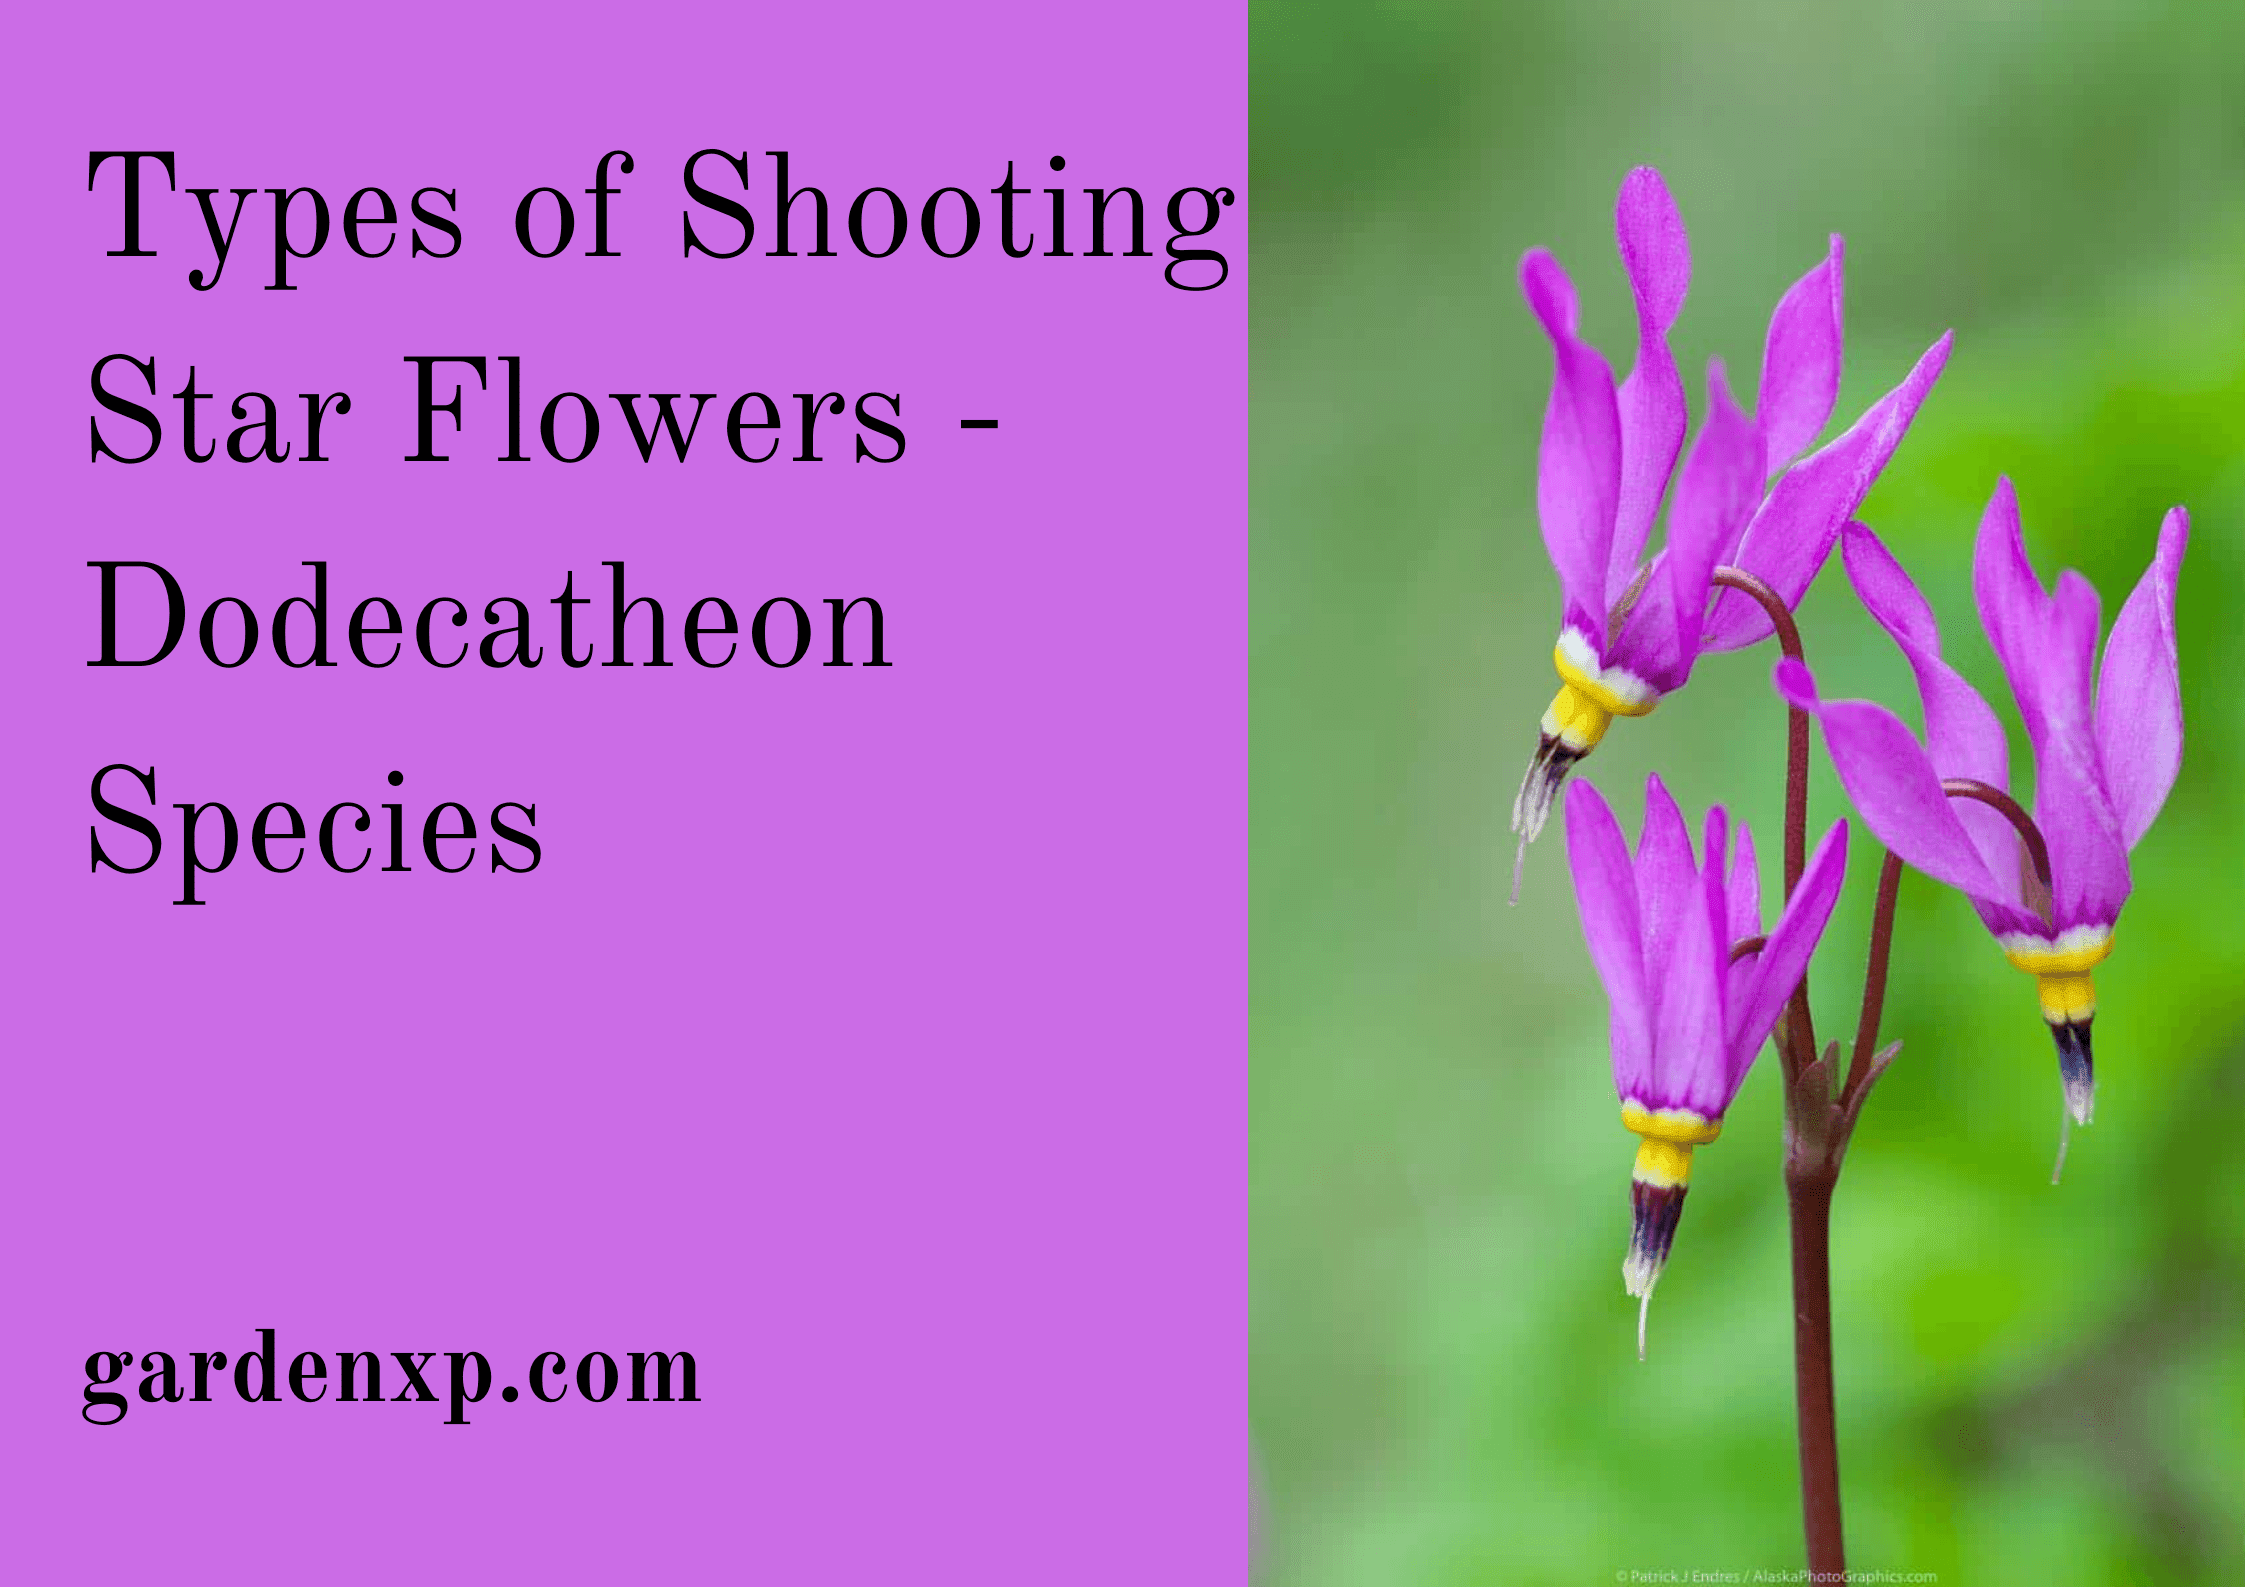 Types of Shooting Star Flowers - Dodecatheon Species